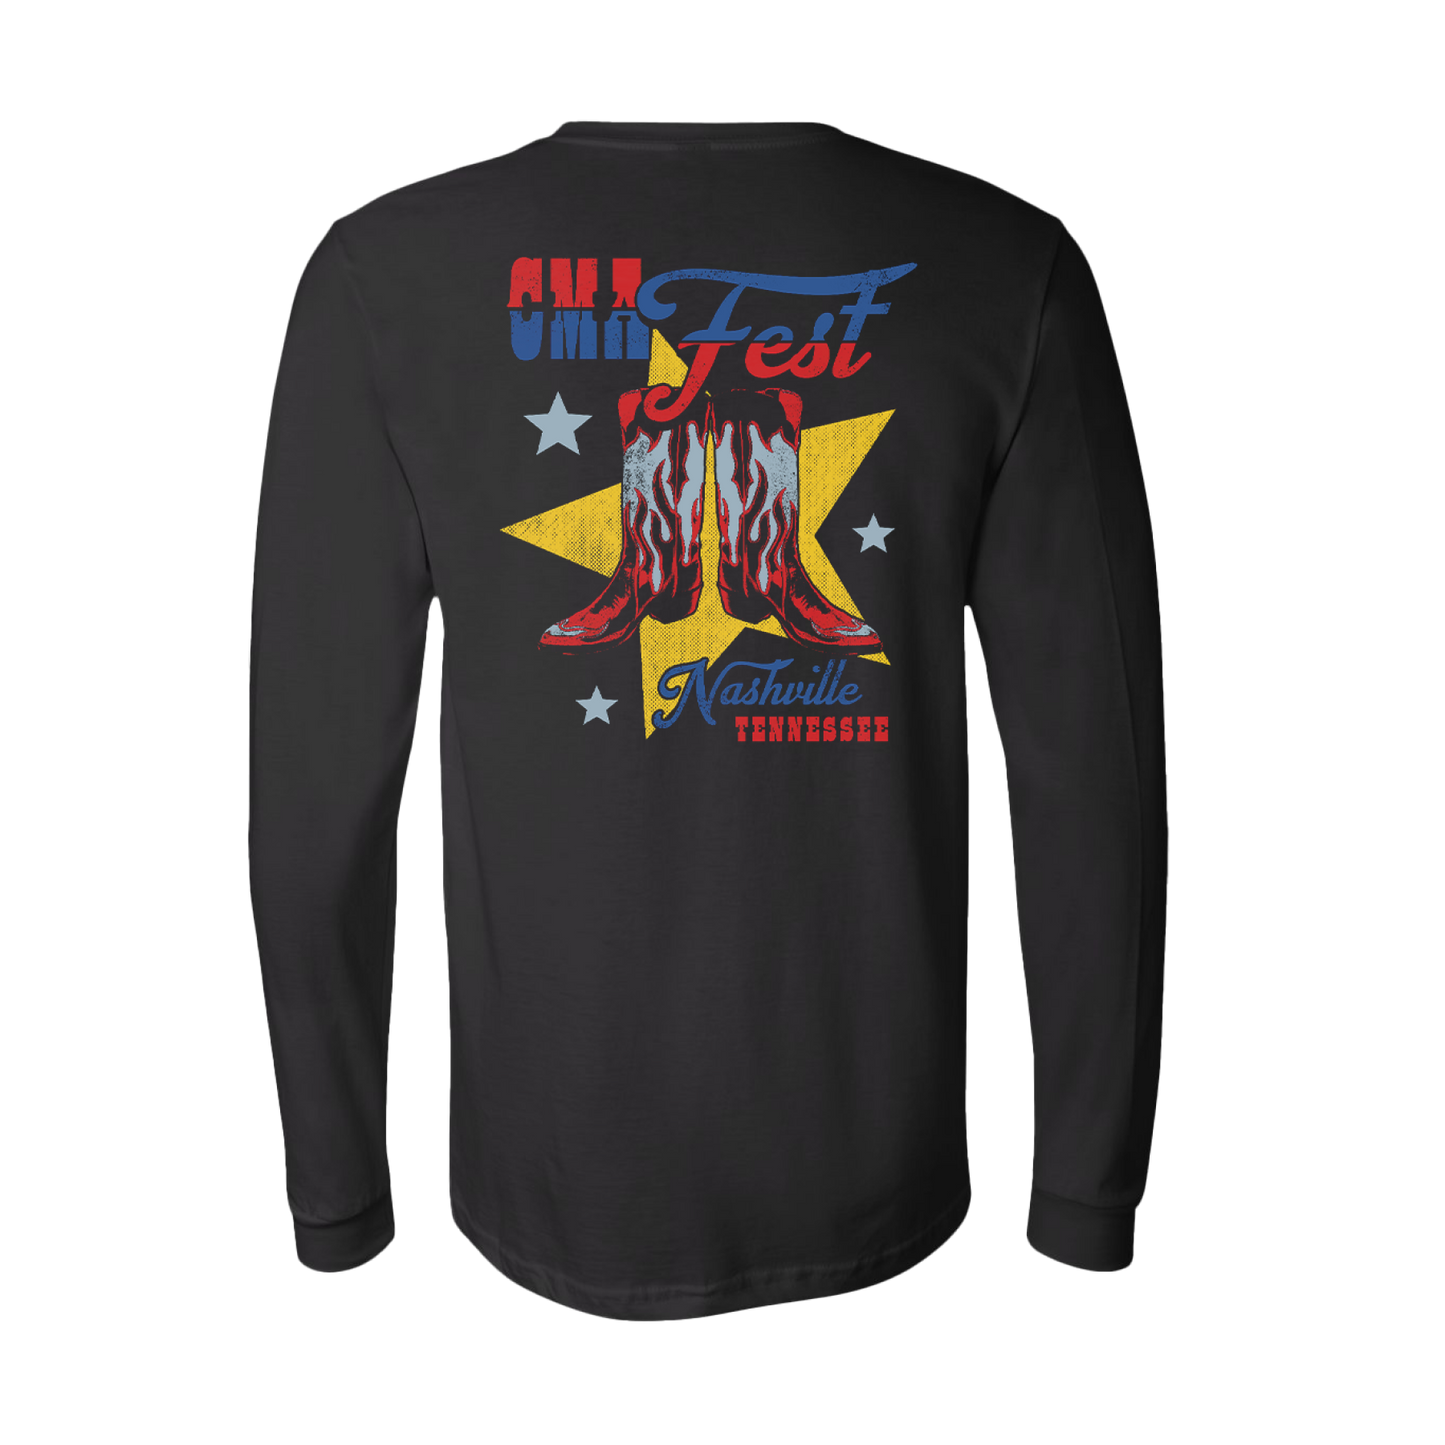 Official CMA Fest Merchandise. This black long sleeve shirt is 100% cotton and features the boots design printed on the back, with a CMA Fest star pocket logo on the front. 